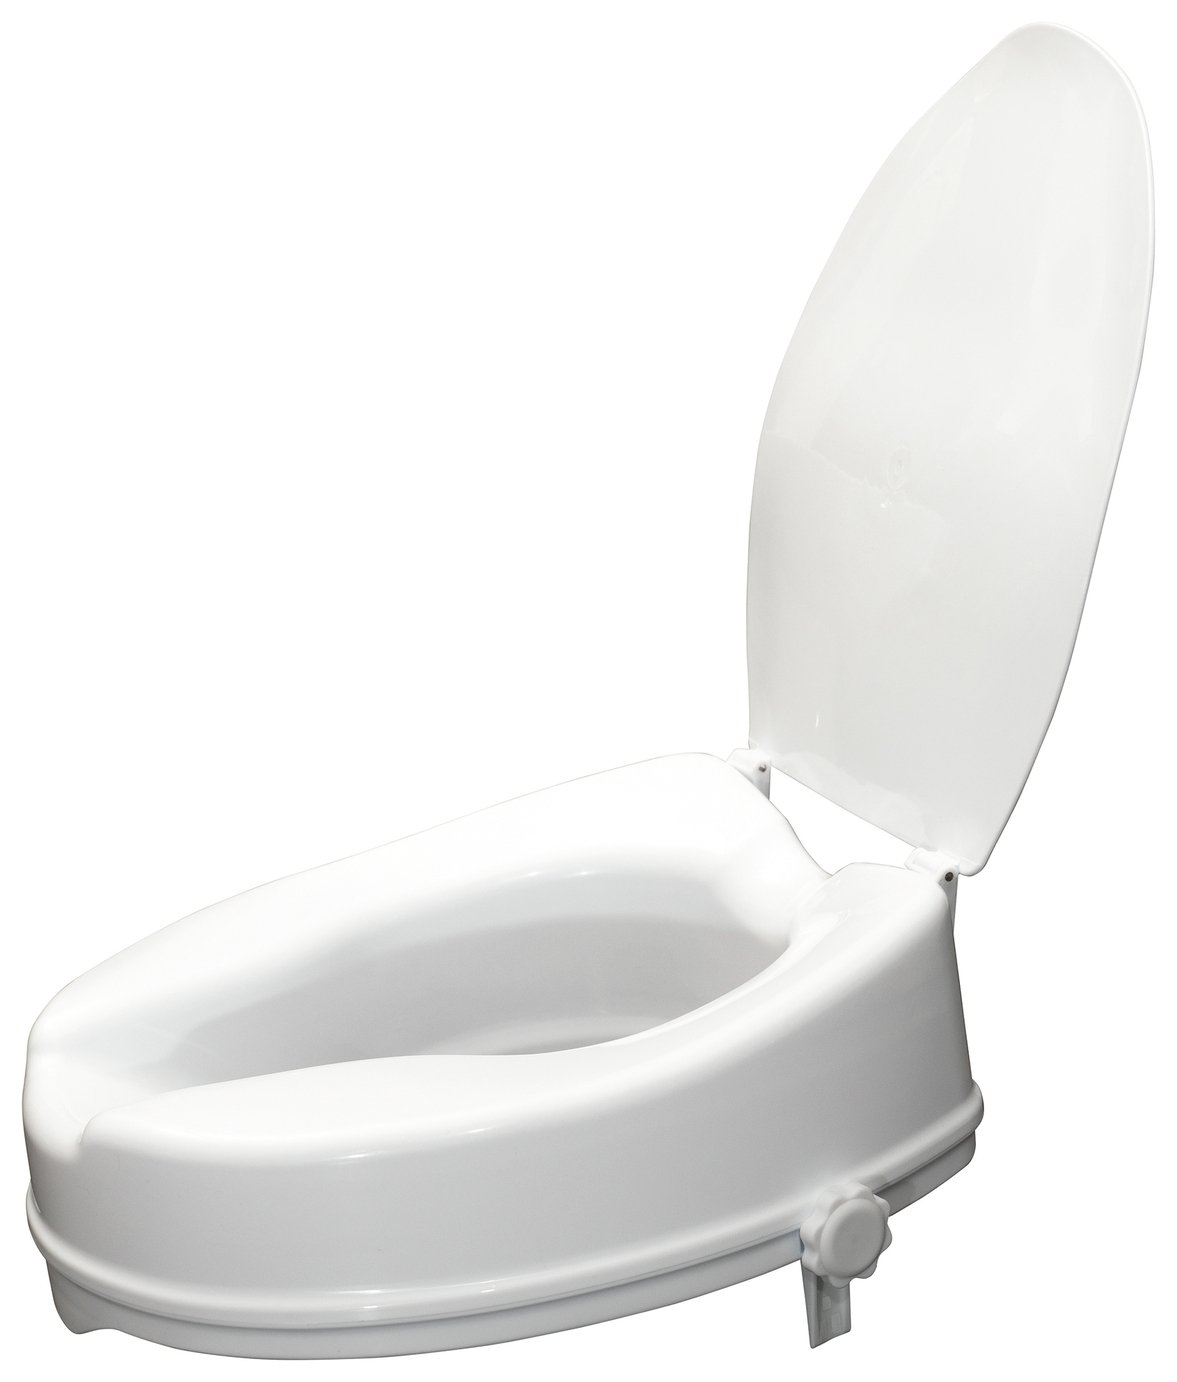 disabled toilet seat